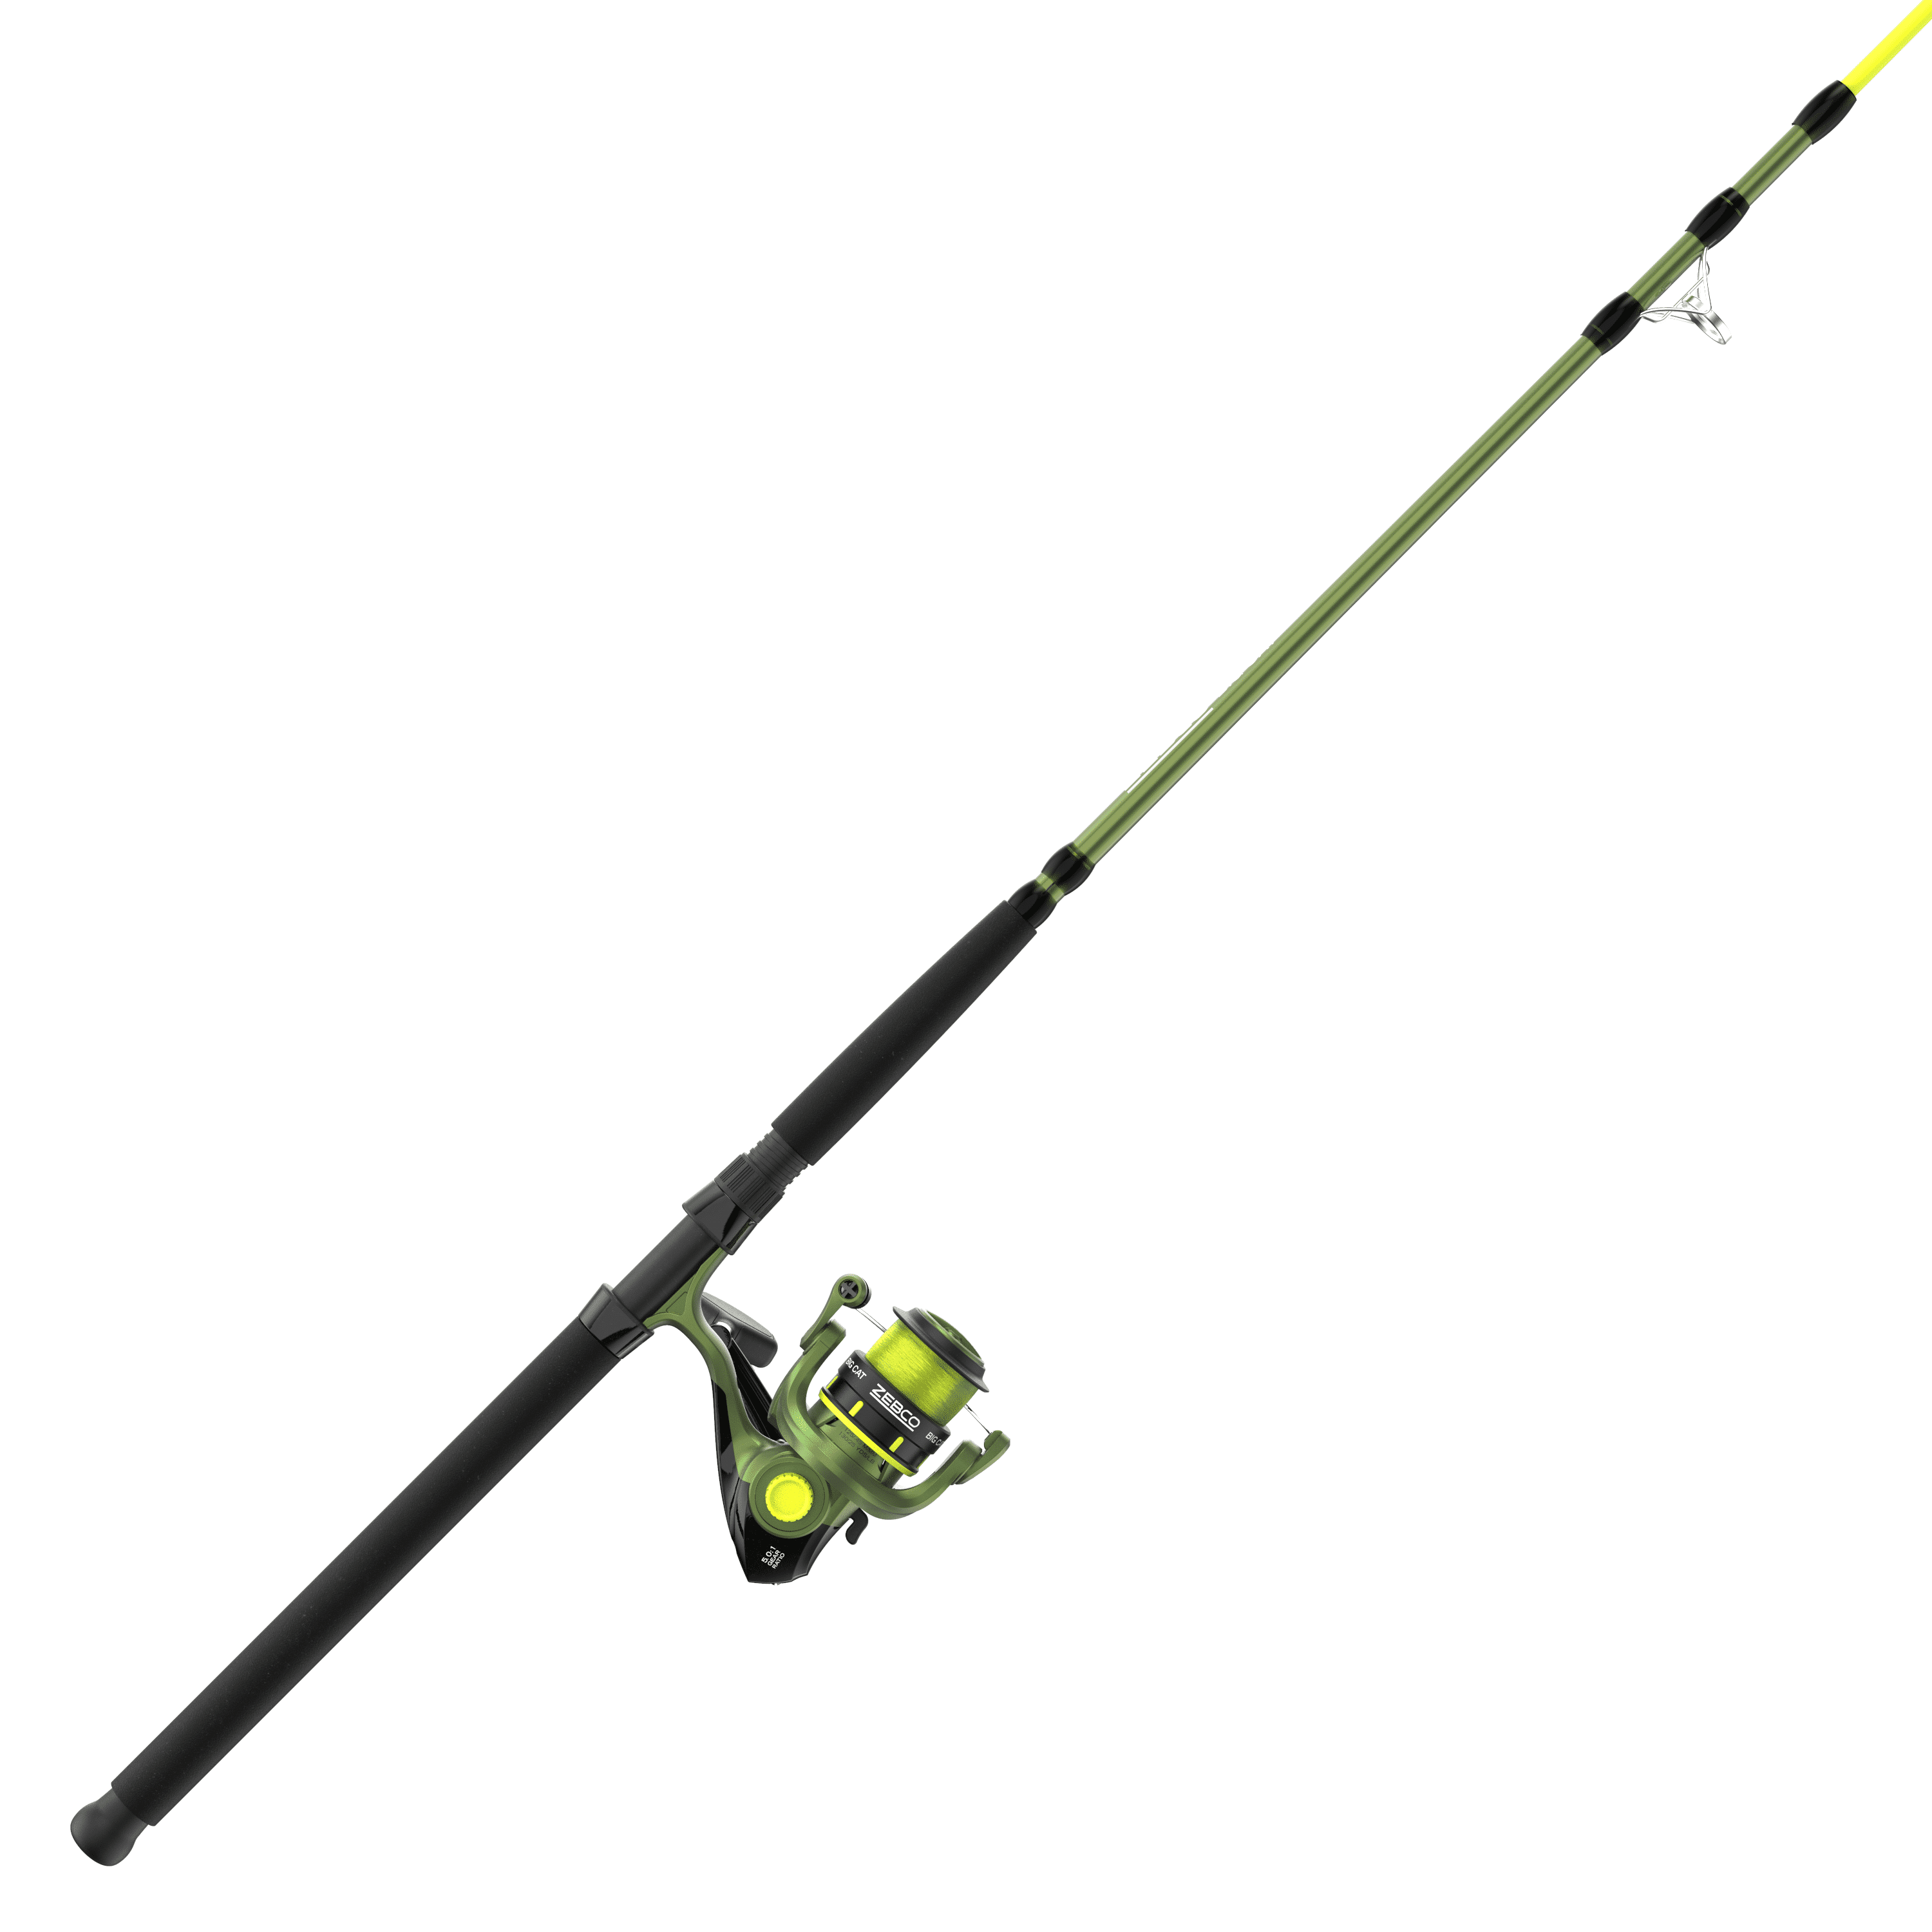 Zebco Big Cat Spinning Reel and Fishing Rod Combo, 8-Foot Rod, Size 60  Reel, Green